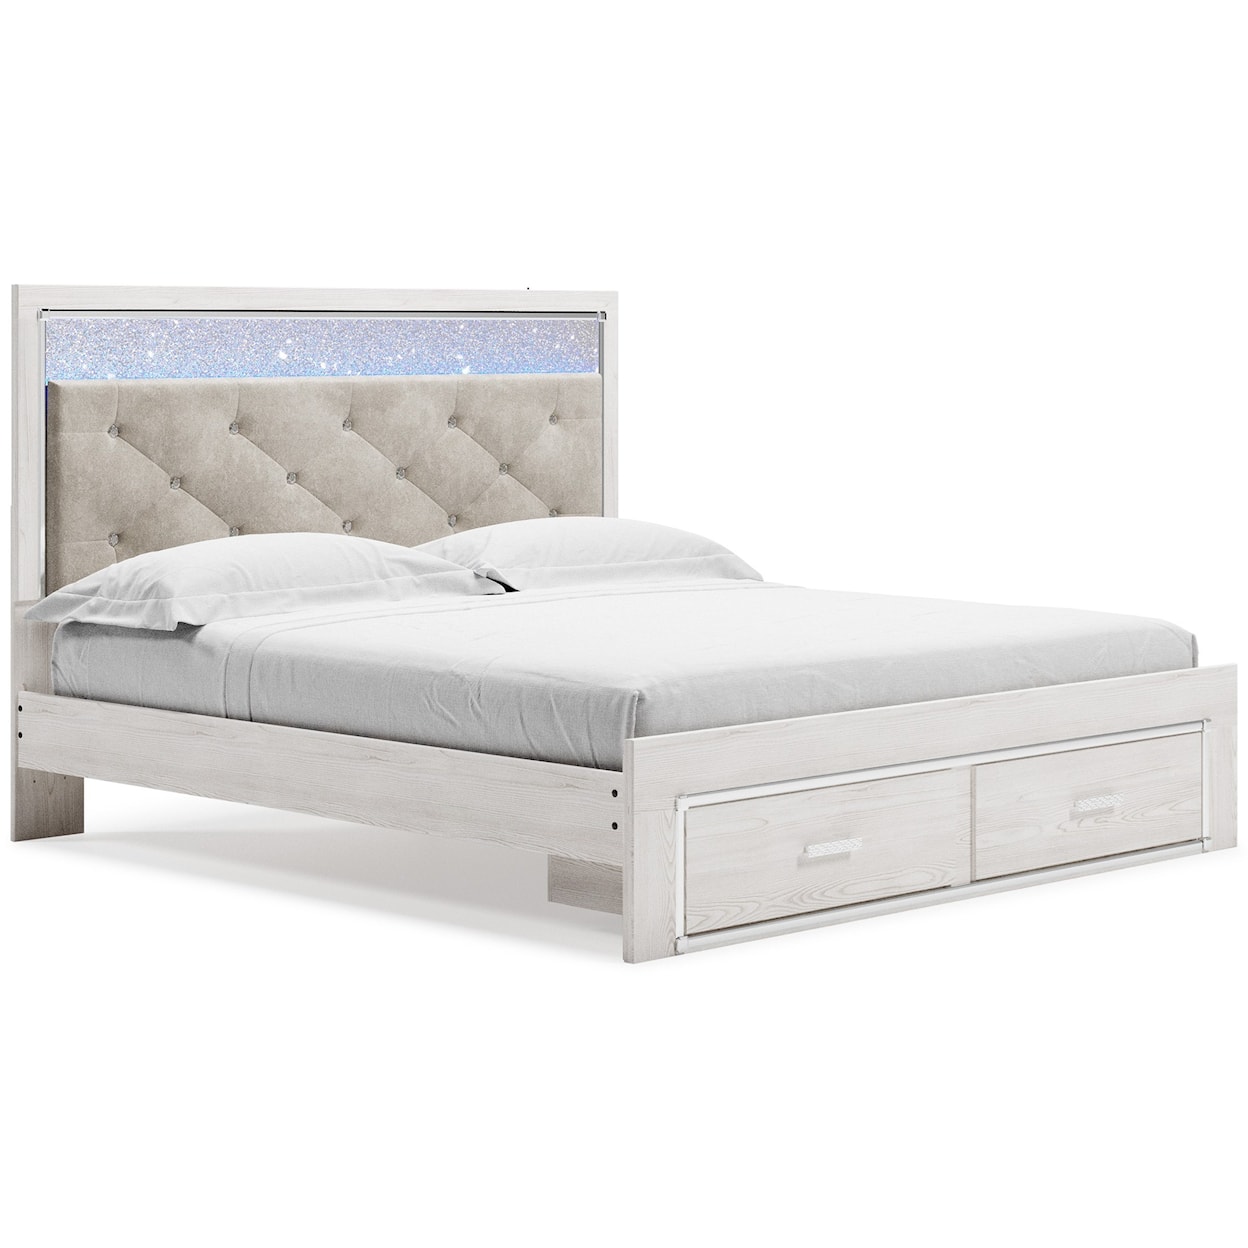 Benchcraft Altyra King Storage Bed with Upholstered Headboard